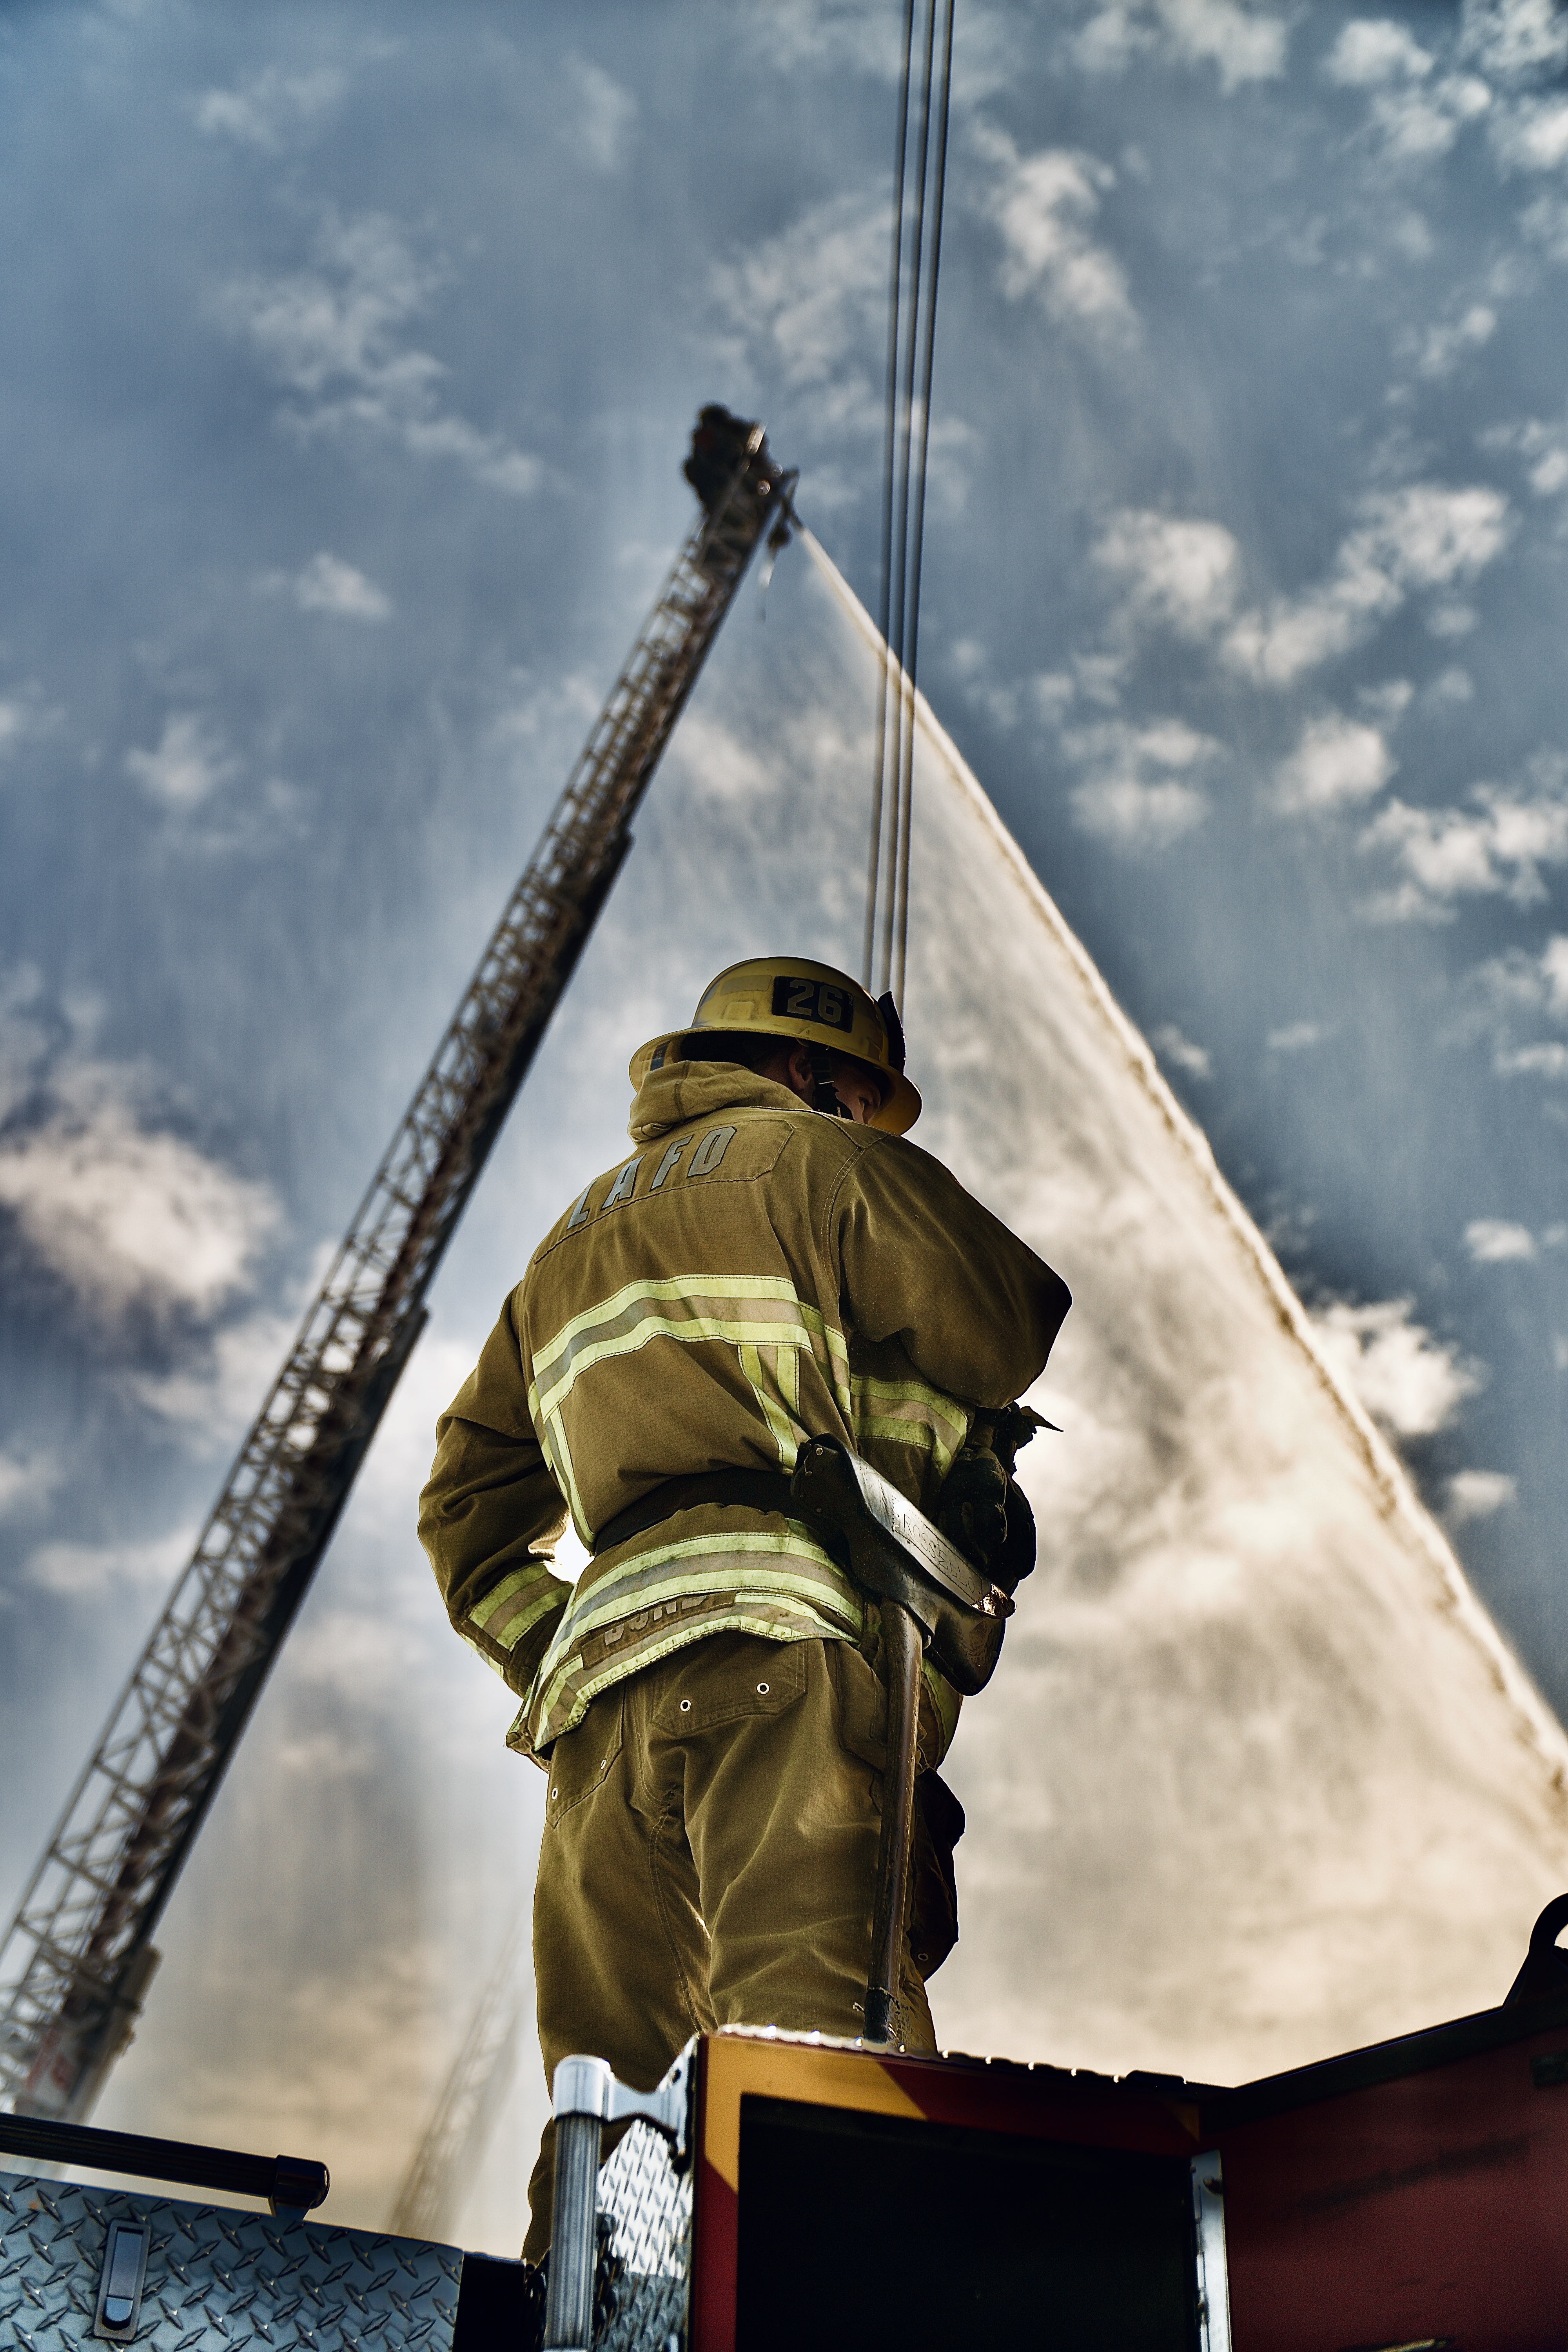 Firefighter standing on fire truck with aerial ladder in the background